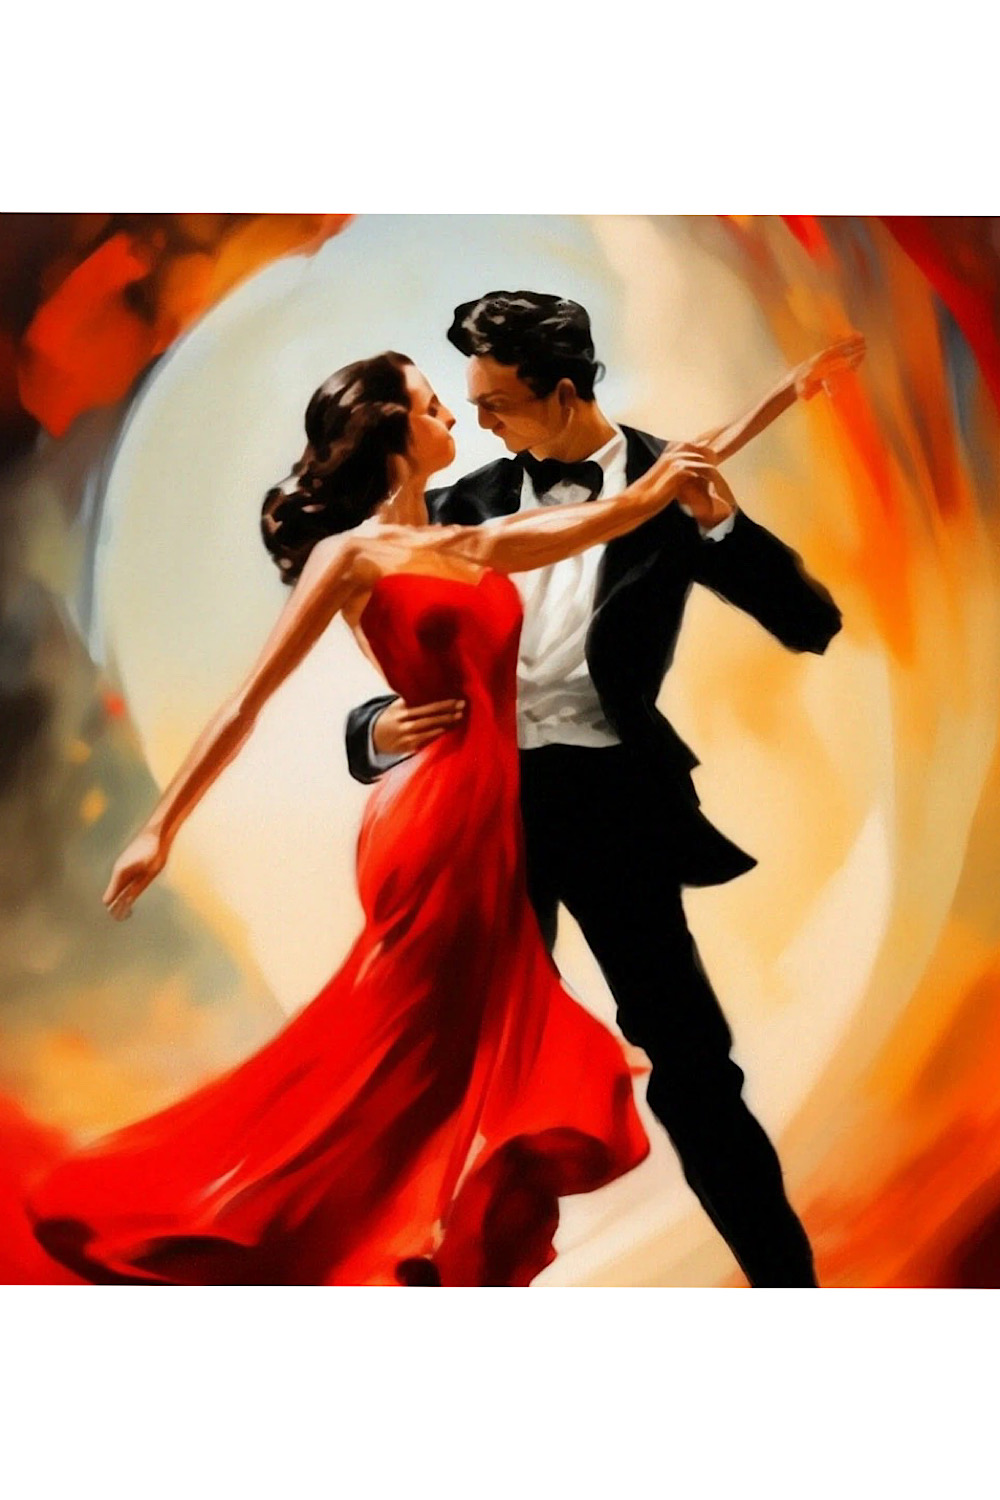 Dali-style oil painting "Tango" pinterest preview image.